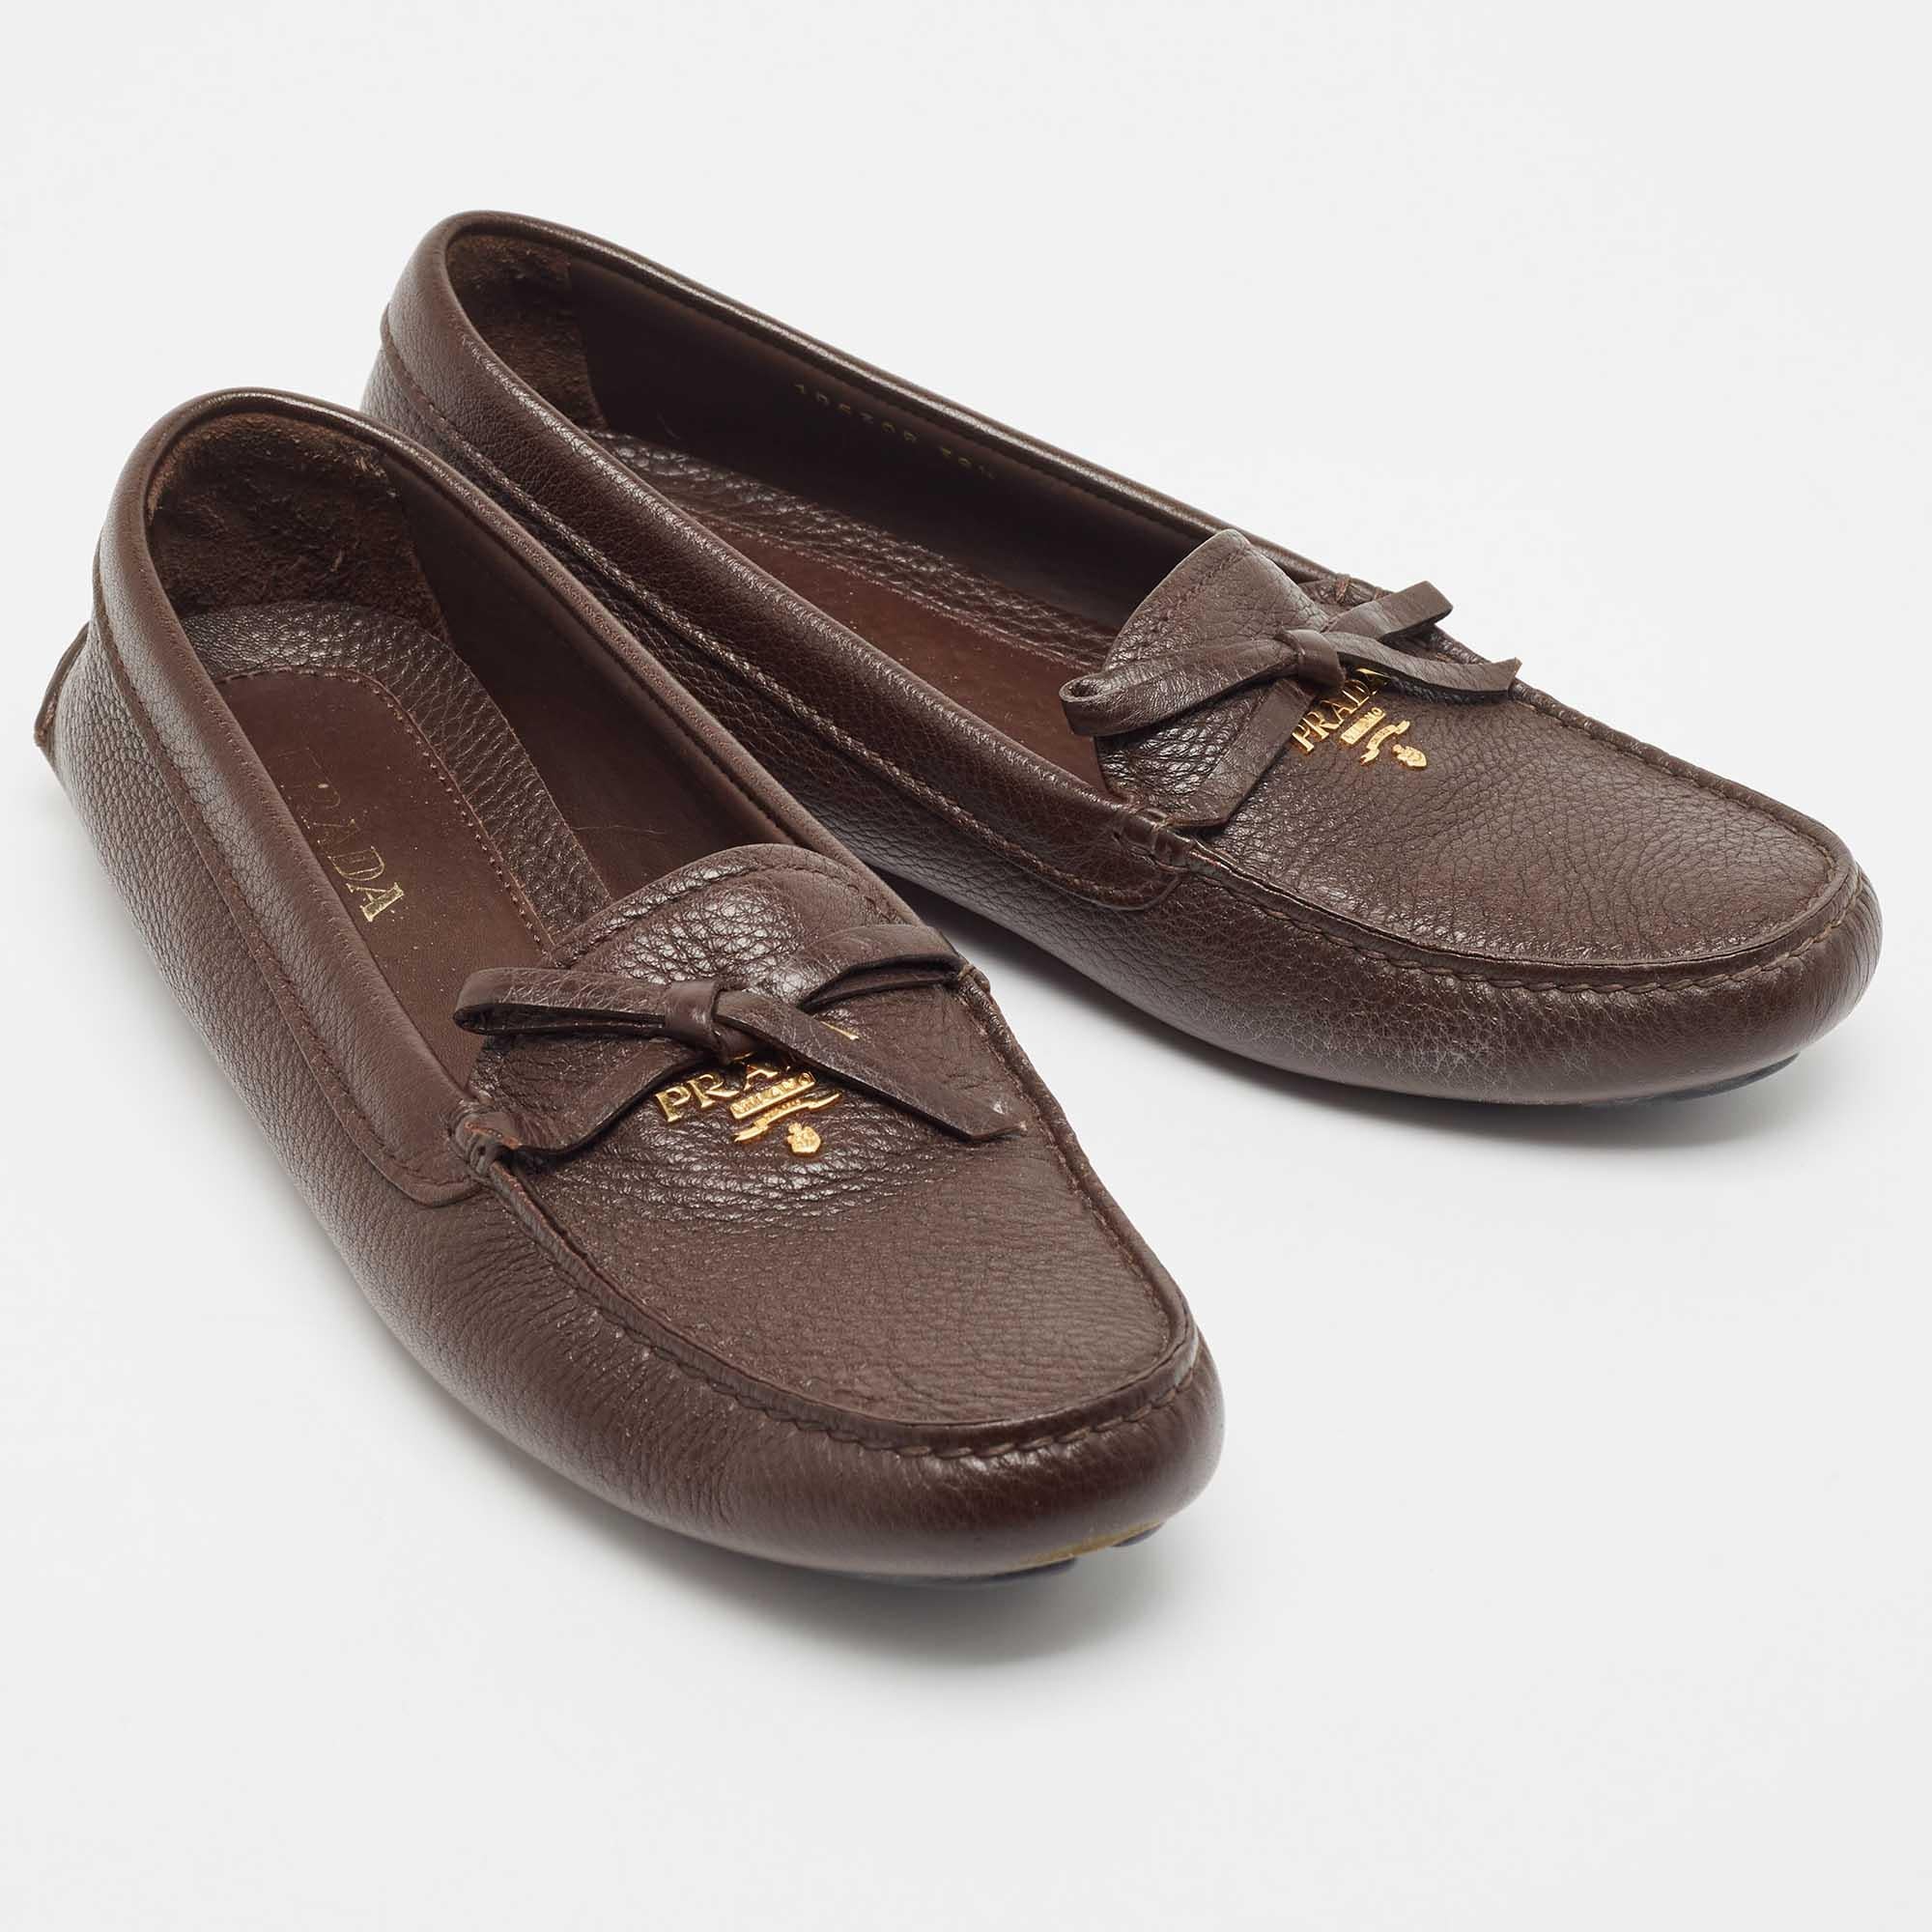 Prada Brown Leather Logo Detail Bow Loafers Size 38.5 In Good Condition For Sale In Dubai, Al Qouz 2